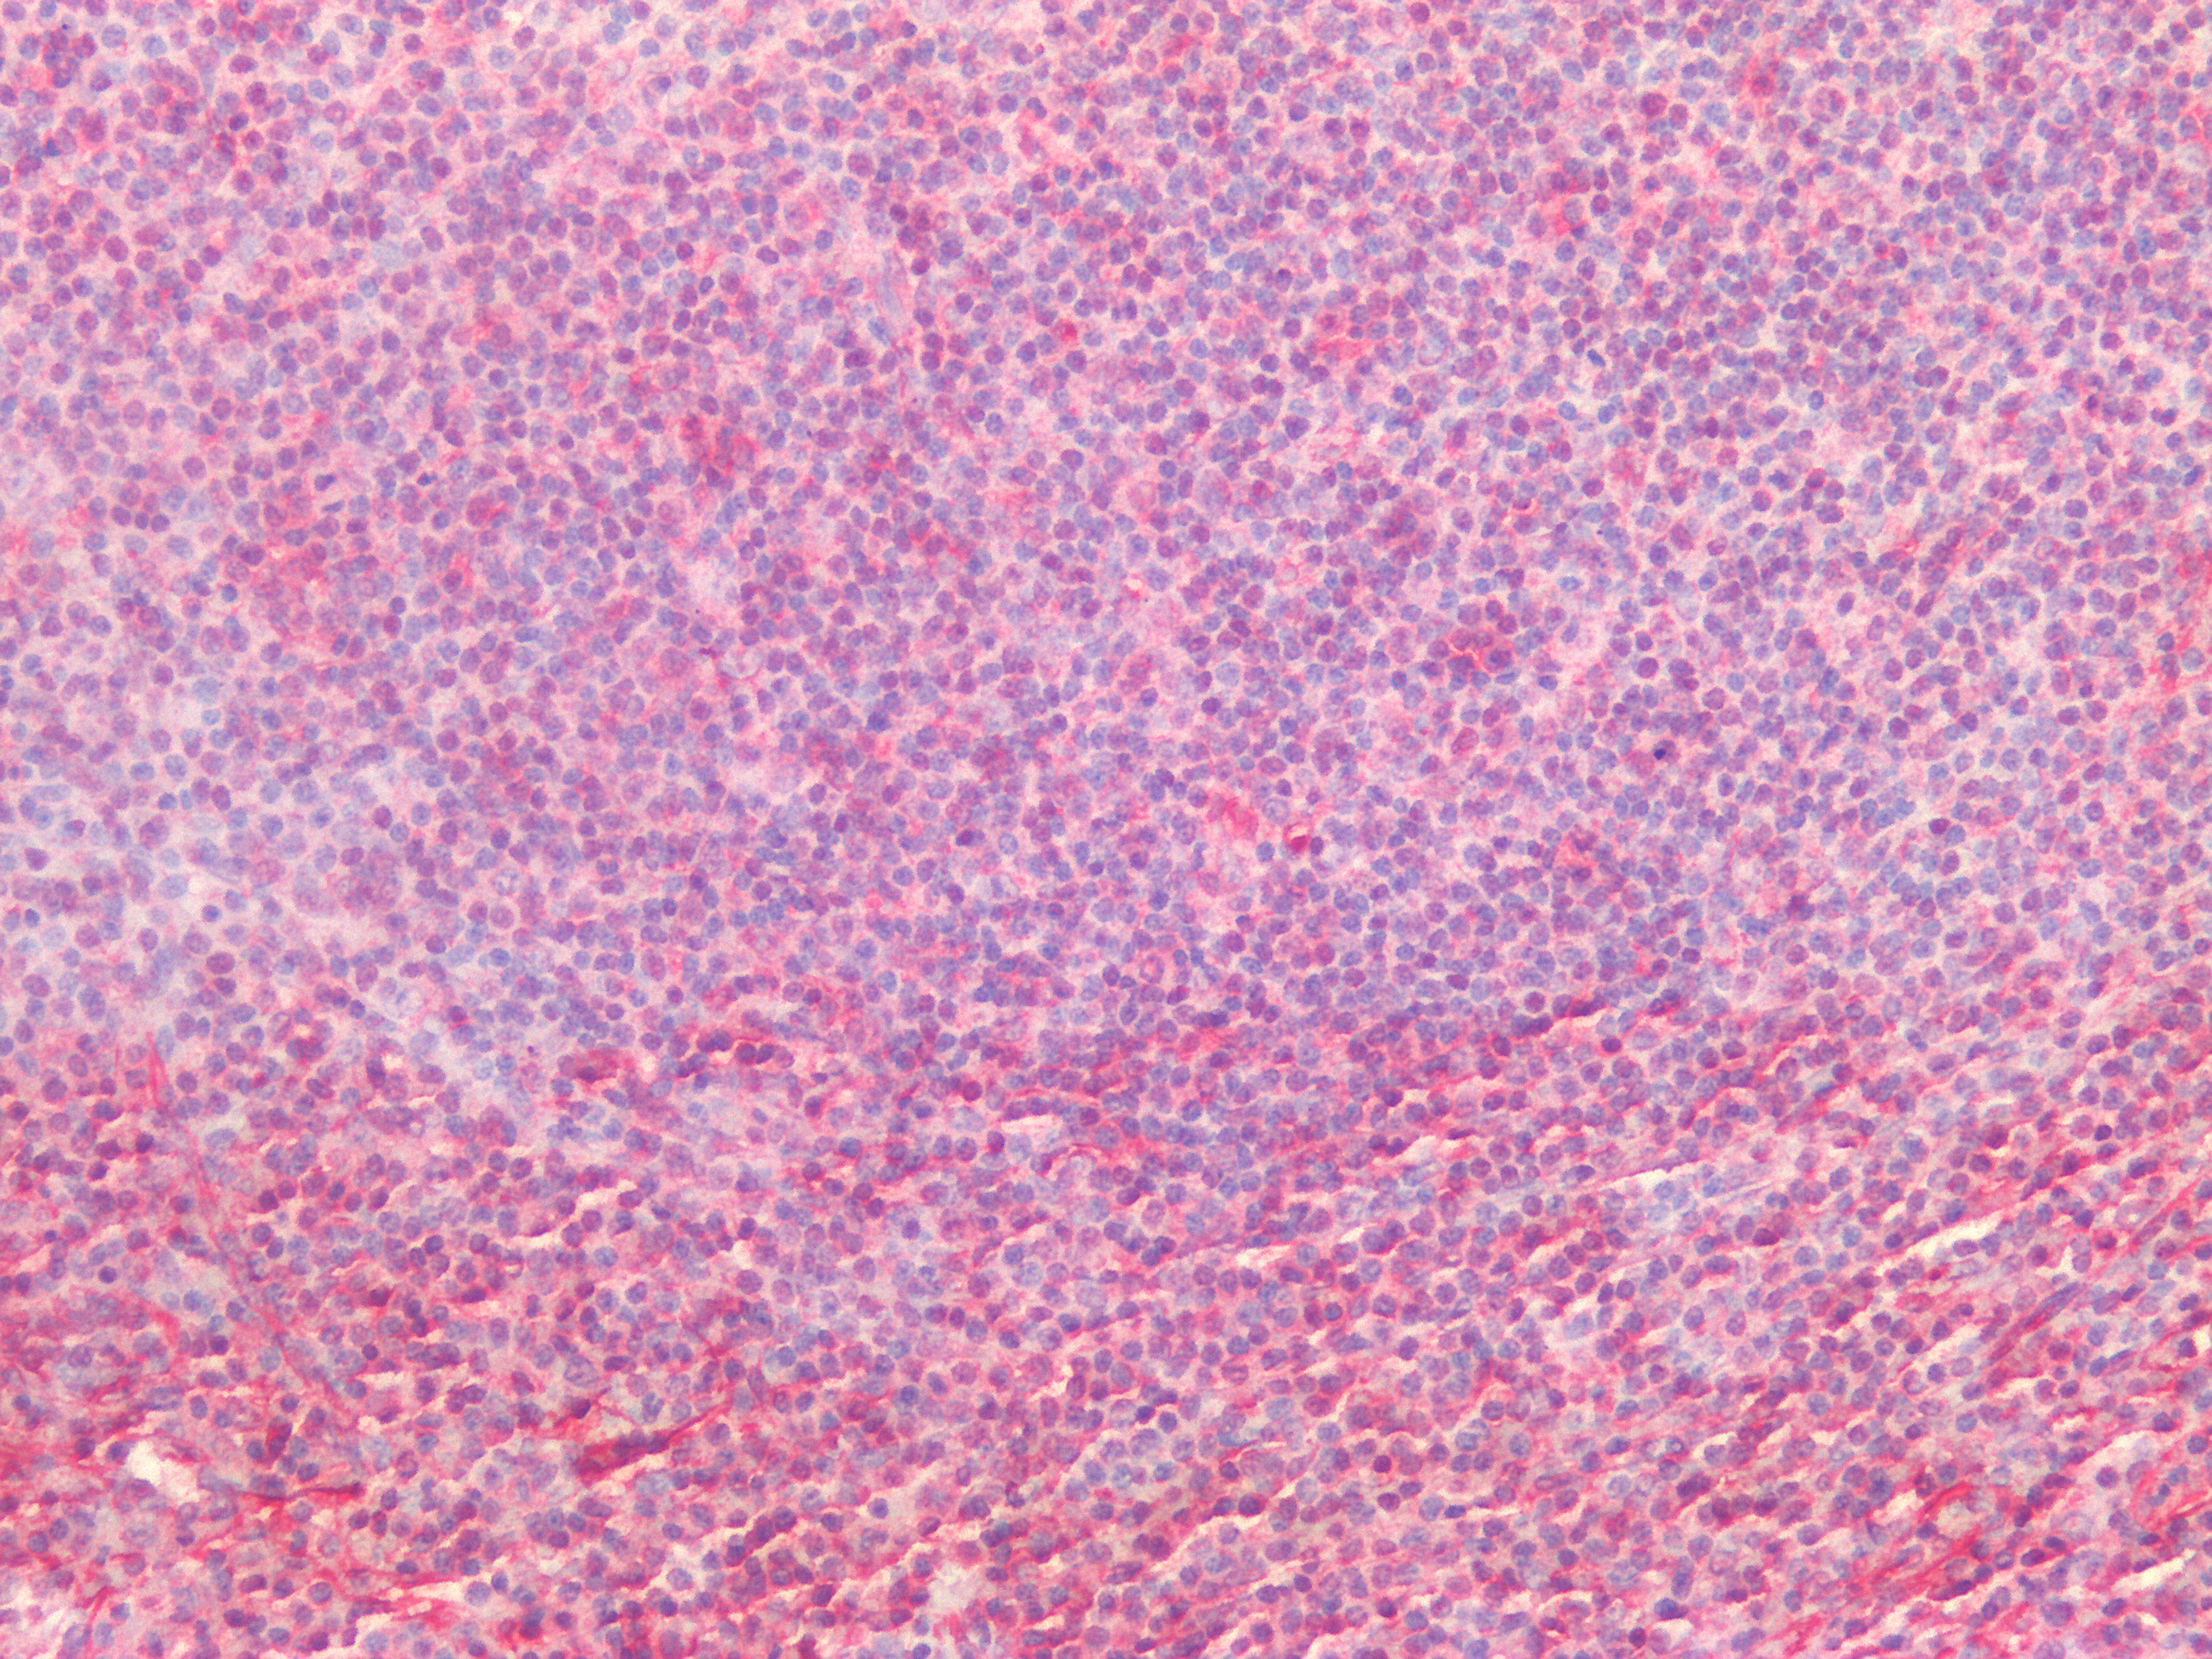 Figure 12. Immunohistochemistry on formalin fixed, paraffin embedded section of human spleen showing positive staining in connective tissue cells and lymphoid cells.